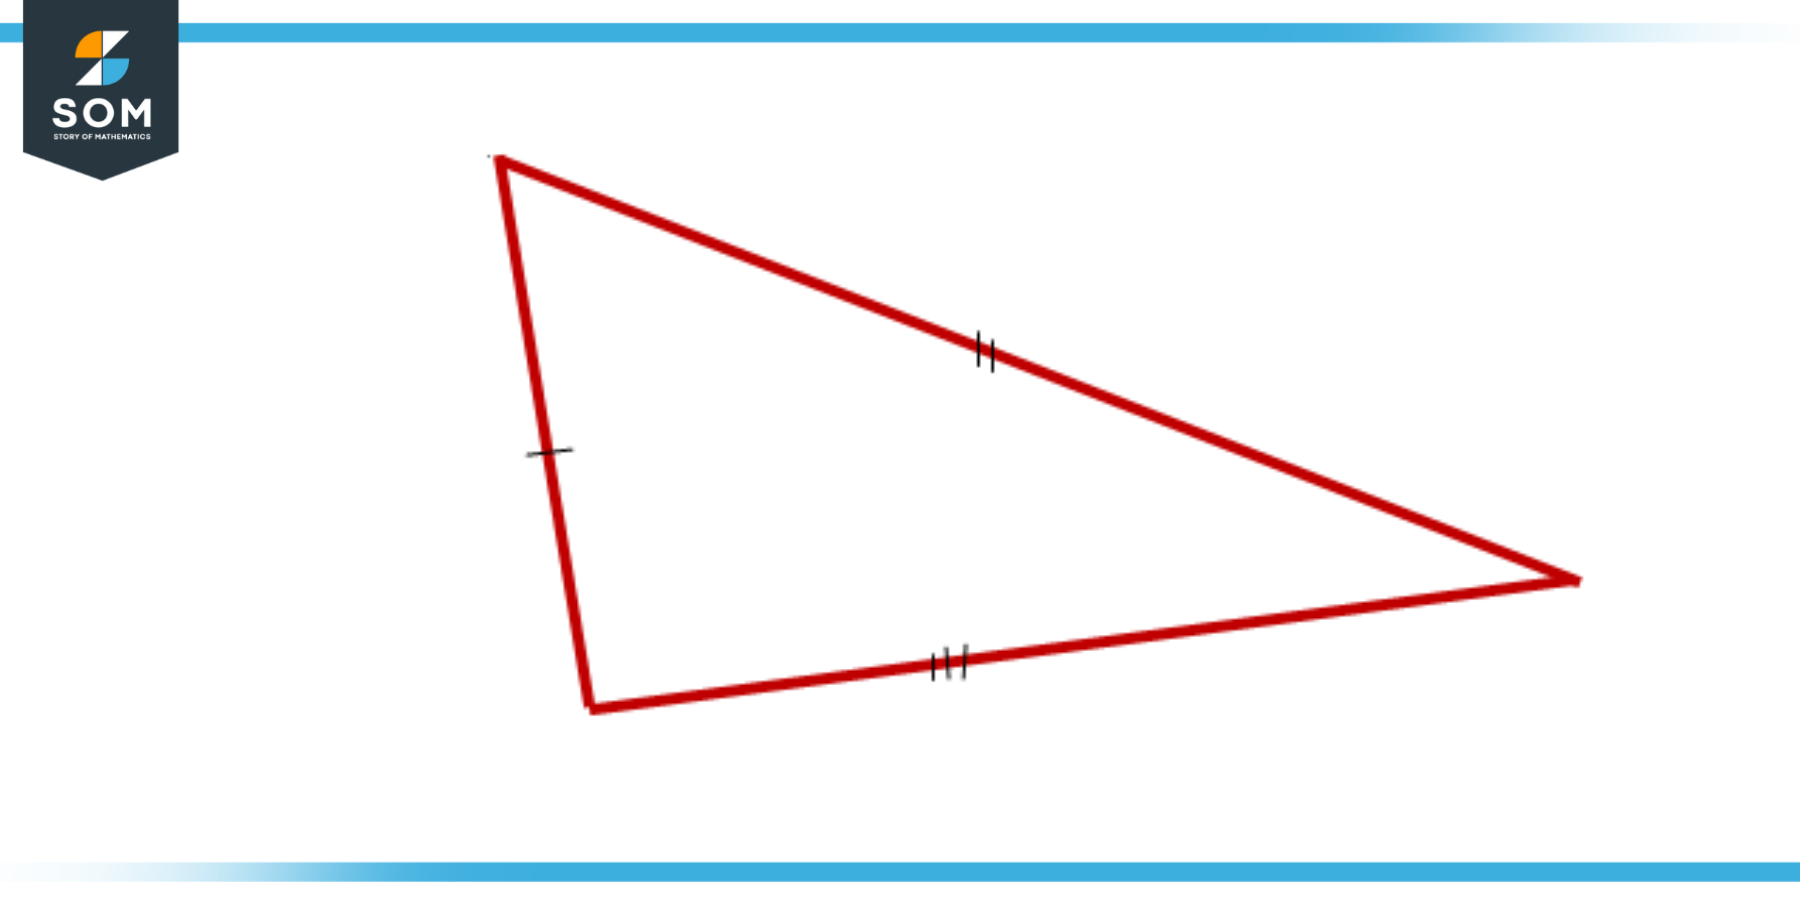 scalene triangle in real life